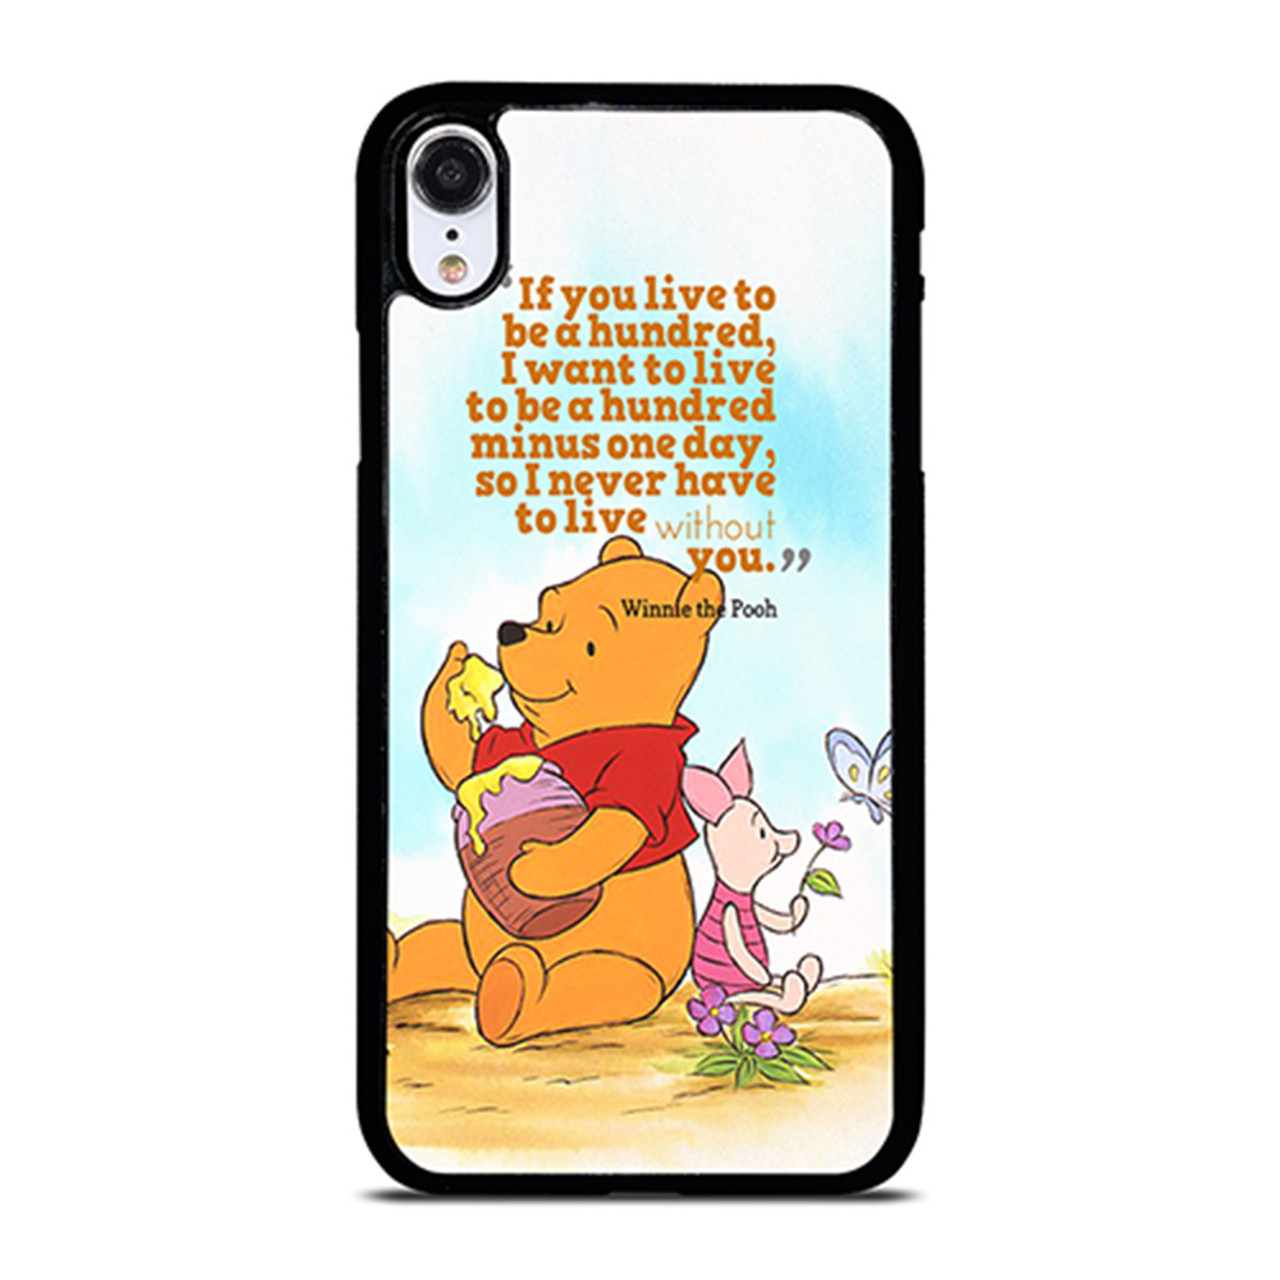 Winnie The Pooh Quote Disney Iphone Xr Case Cover